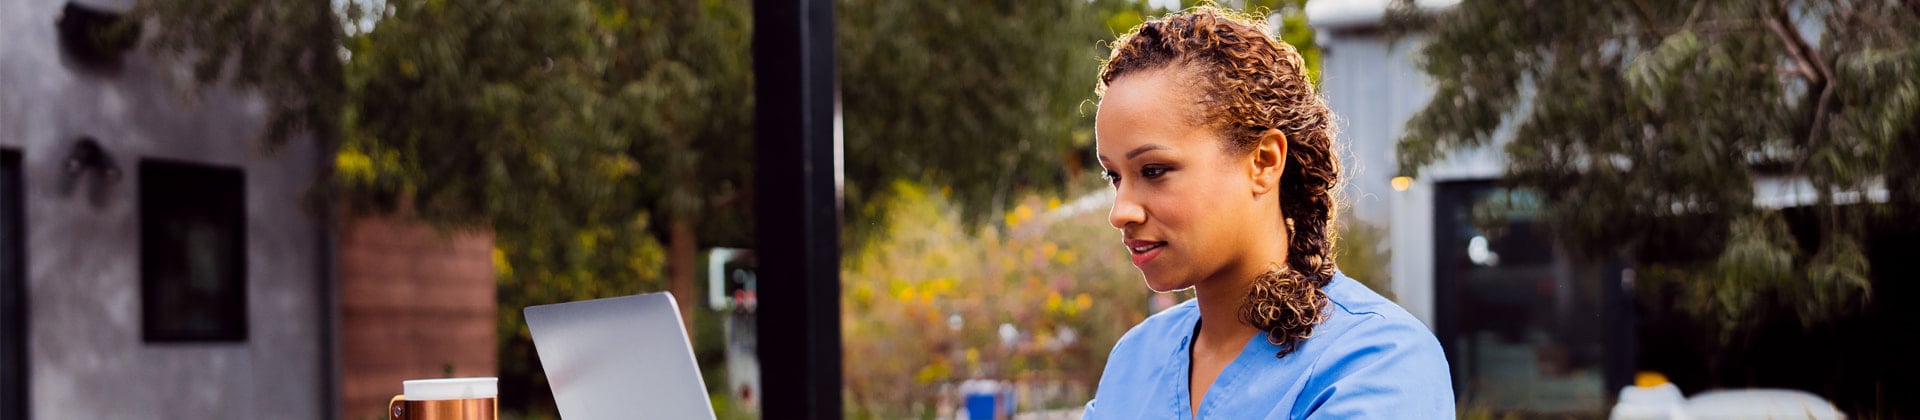 Woman in blue scrubs with braided curly hair sits outside looking at a laptop